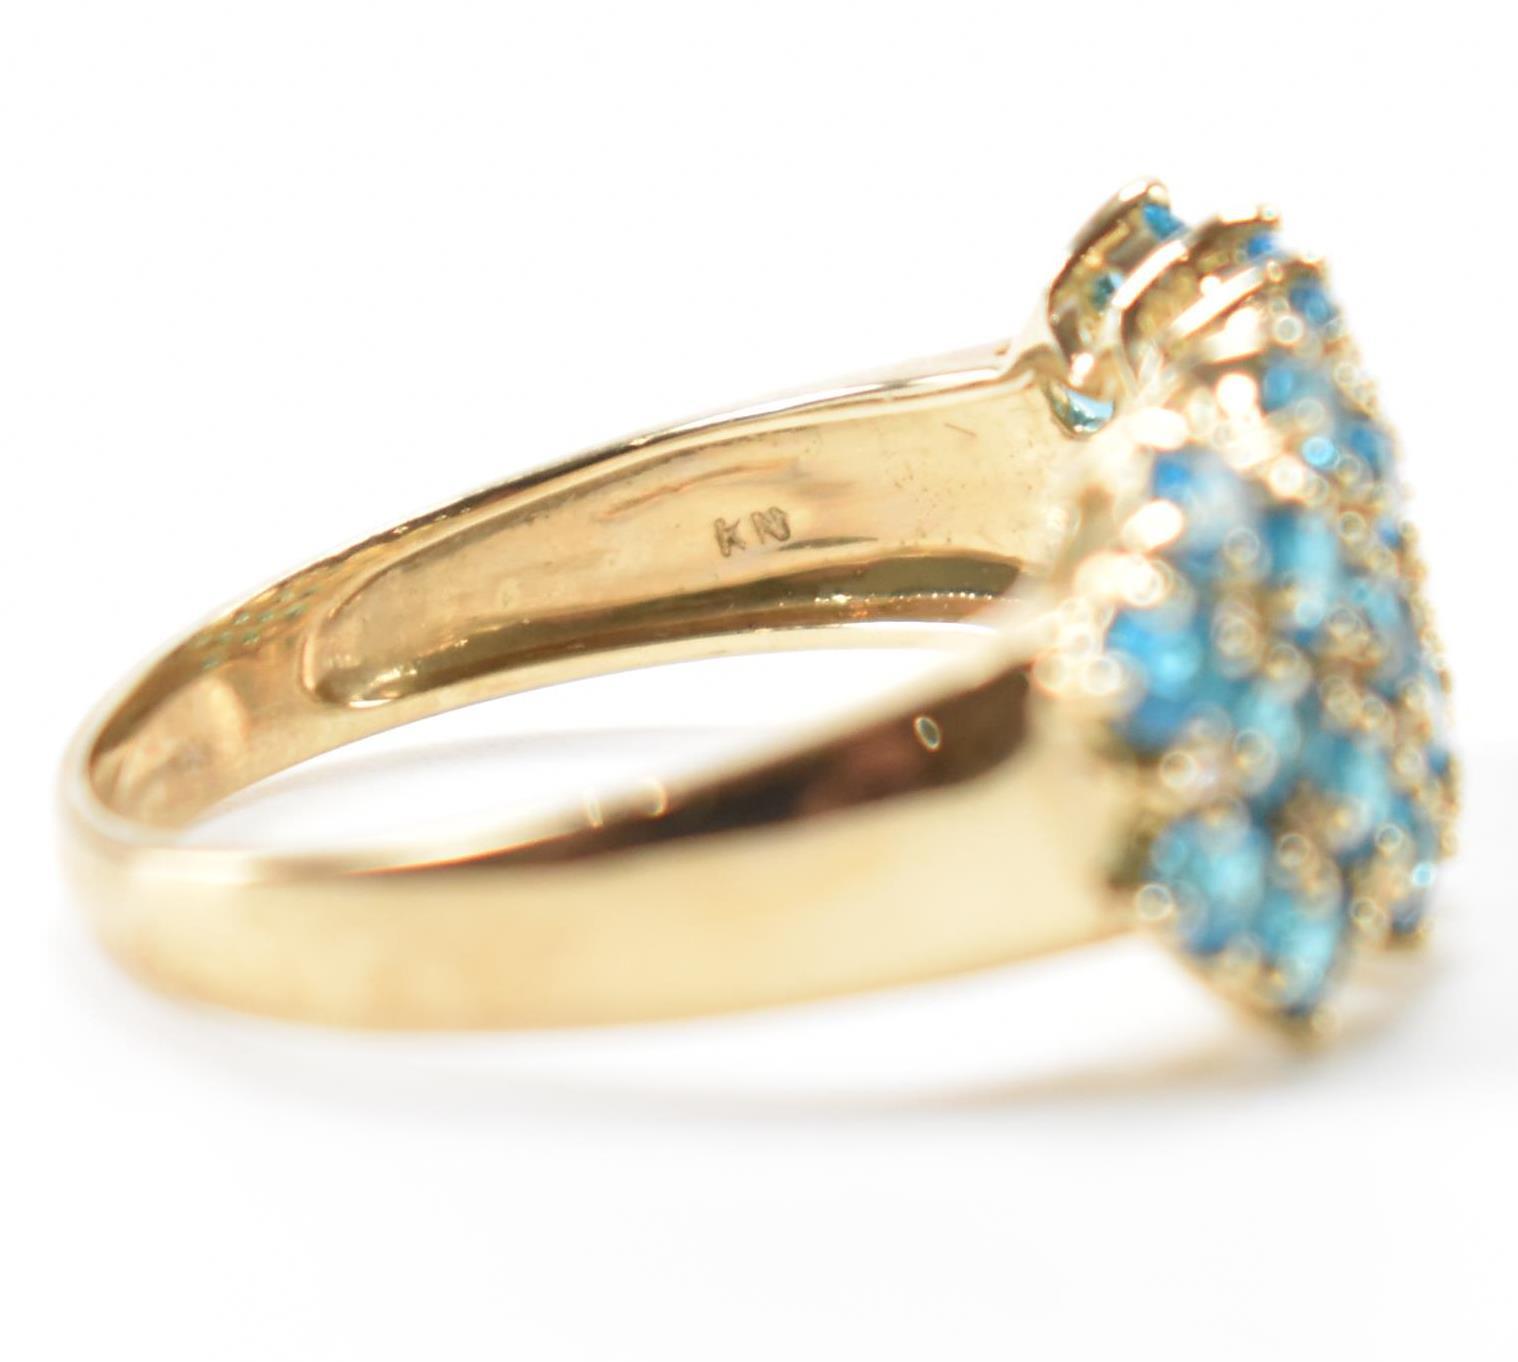 HALLMARKED 9CT GOLD DIAMOND & BLUE STONE CLUSTER RING - Image 6 of 9